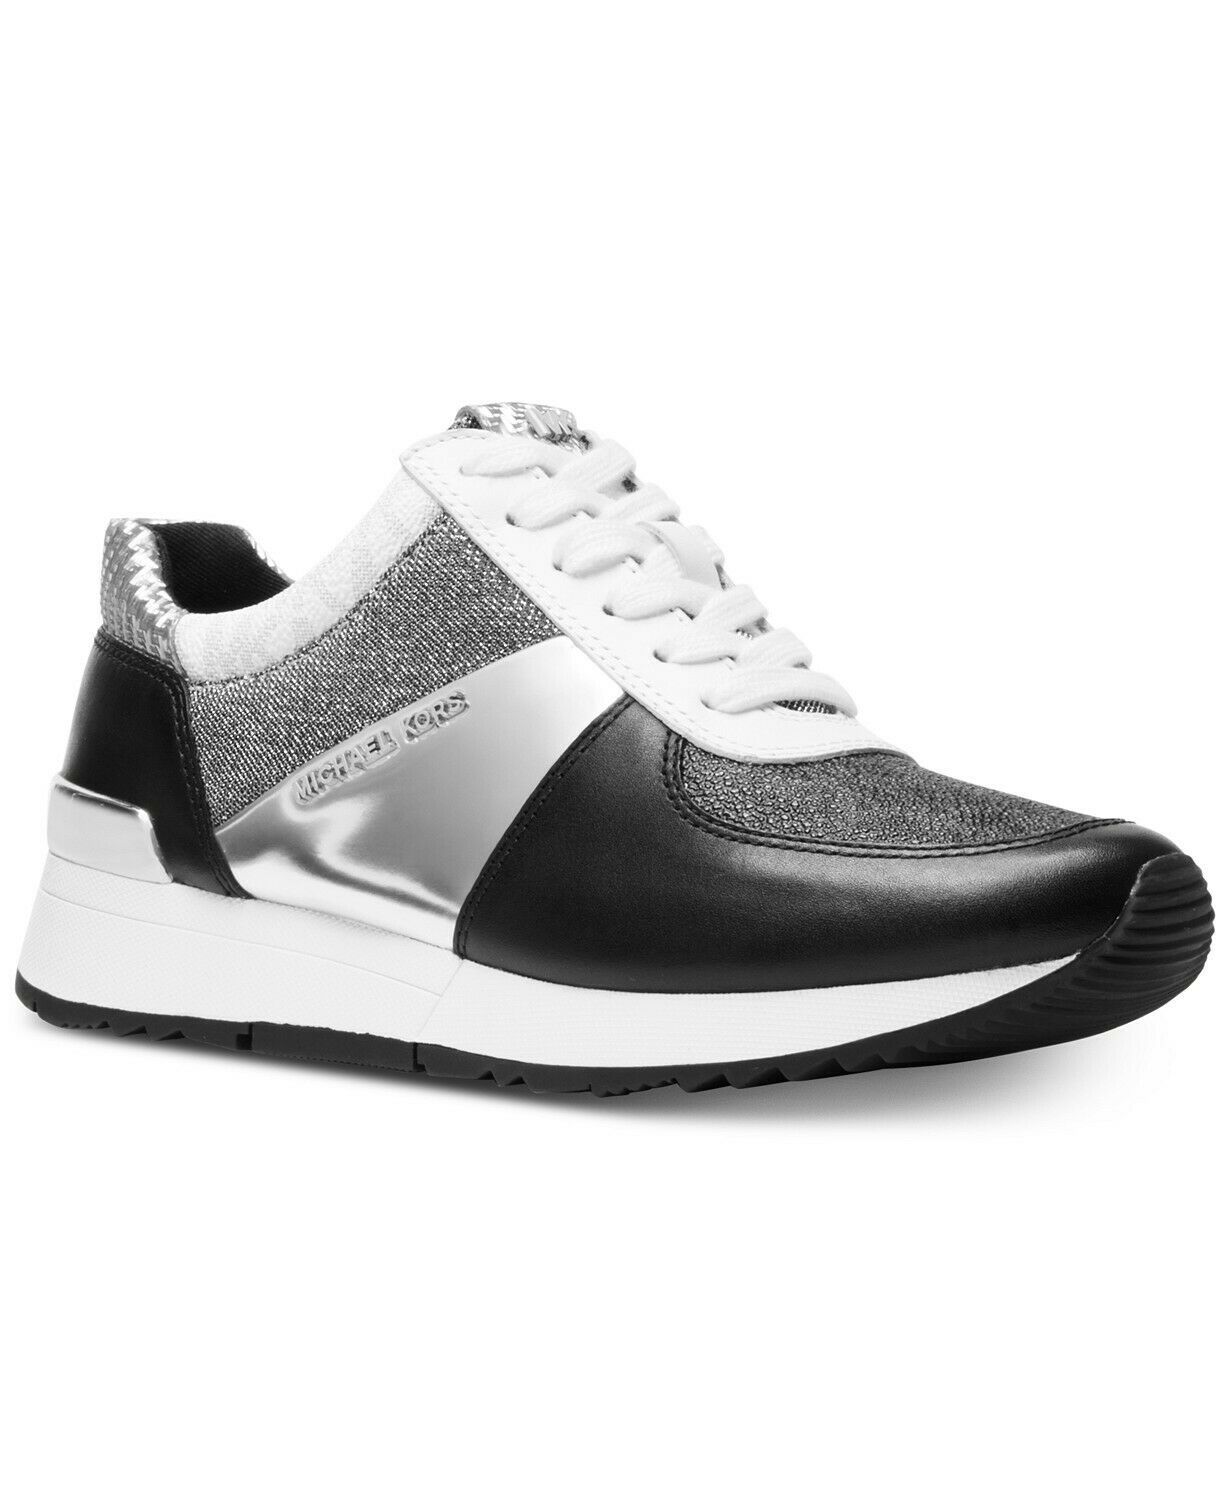 michael kors shoes black and white